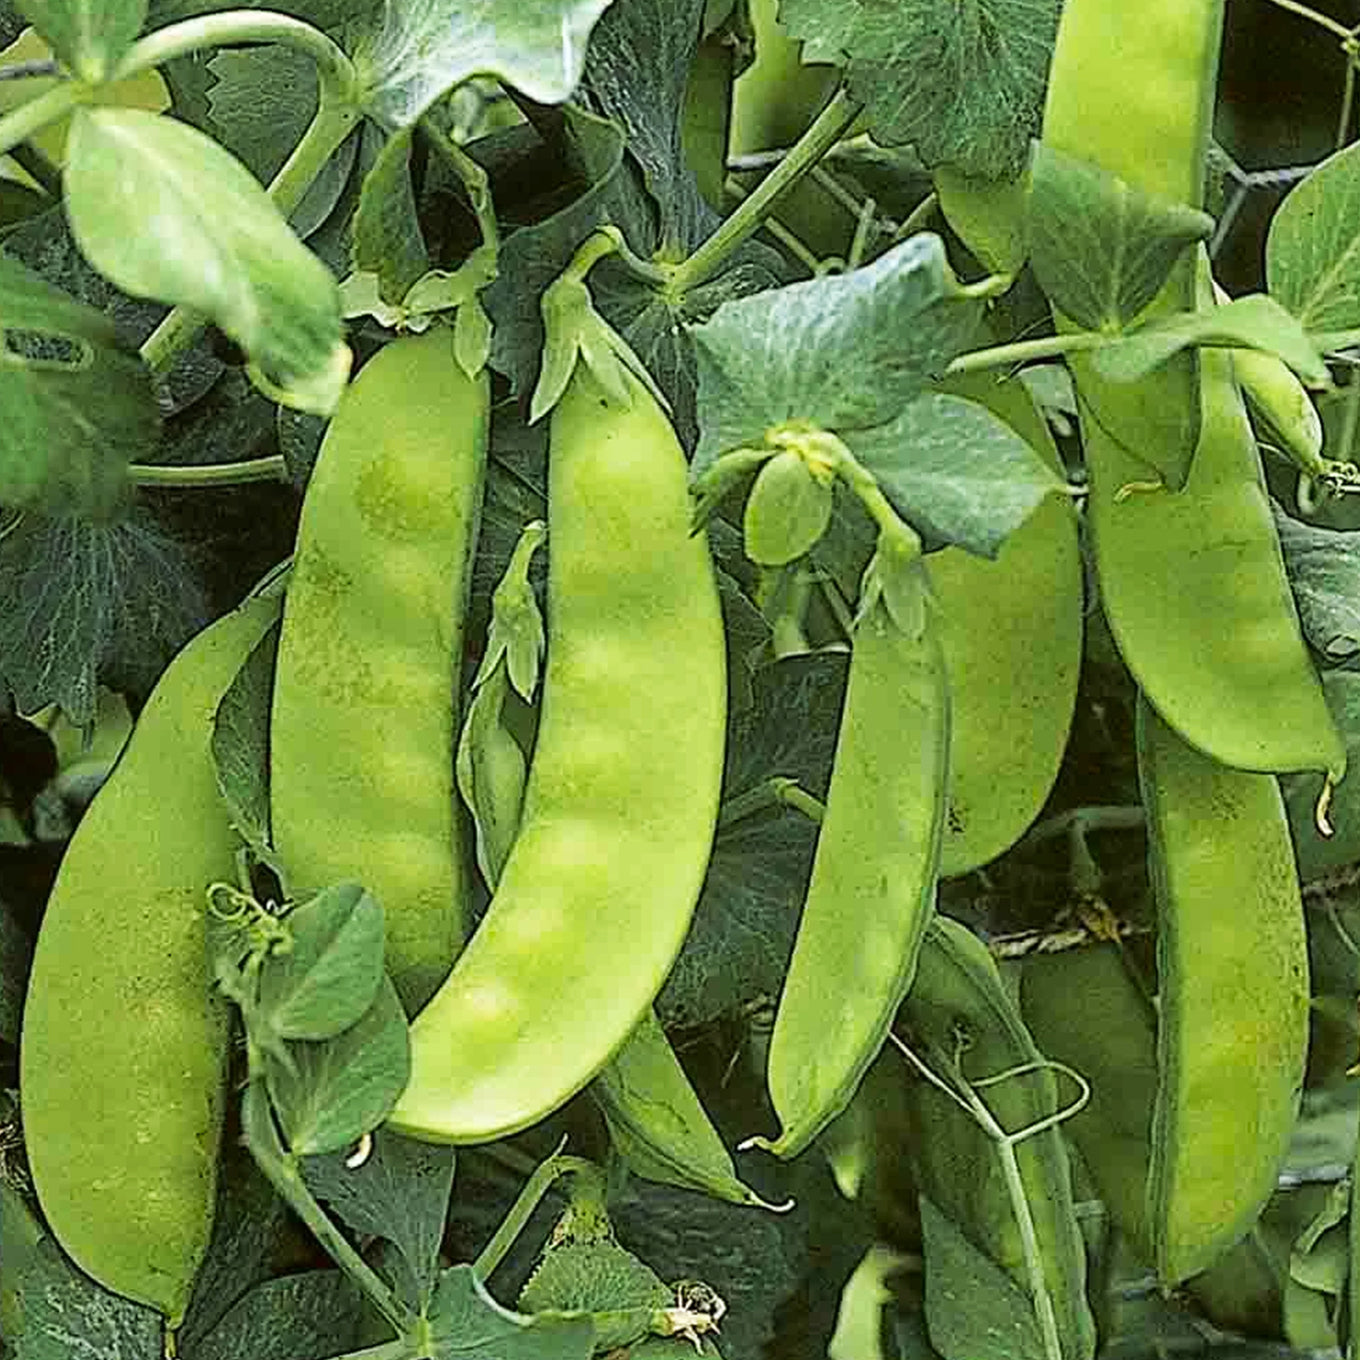 Taichung Tc 11 Snow Peas Seeds grown into snow pea plant with pods ready for picking.